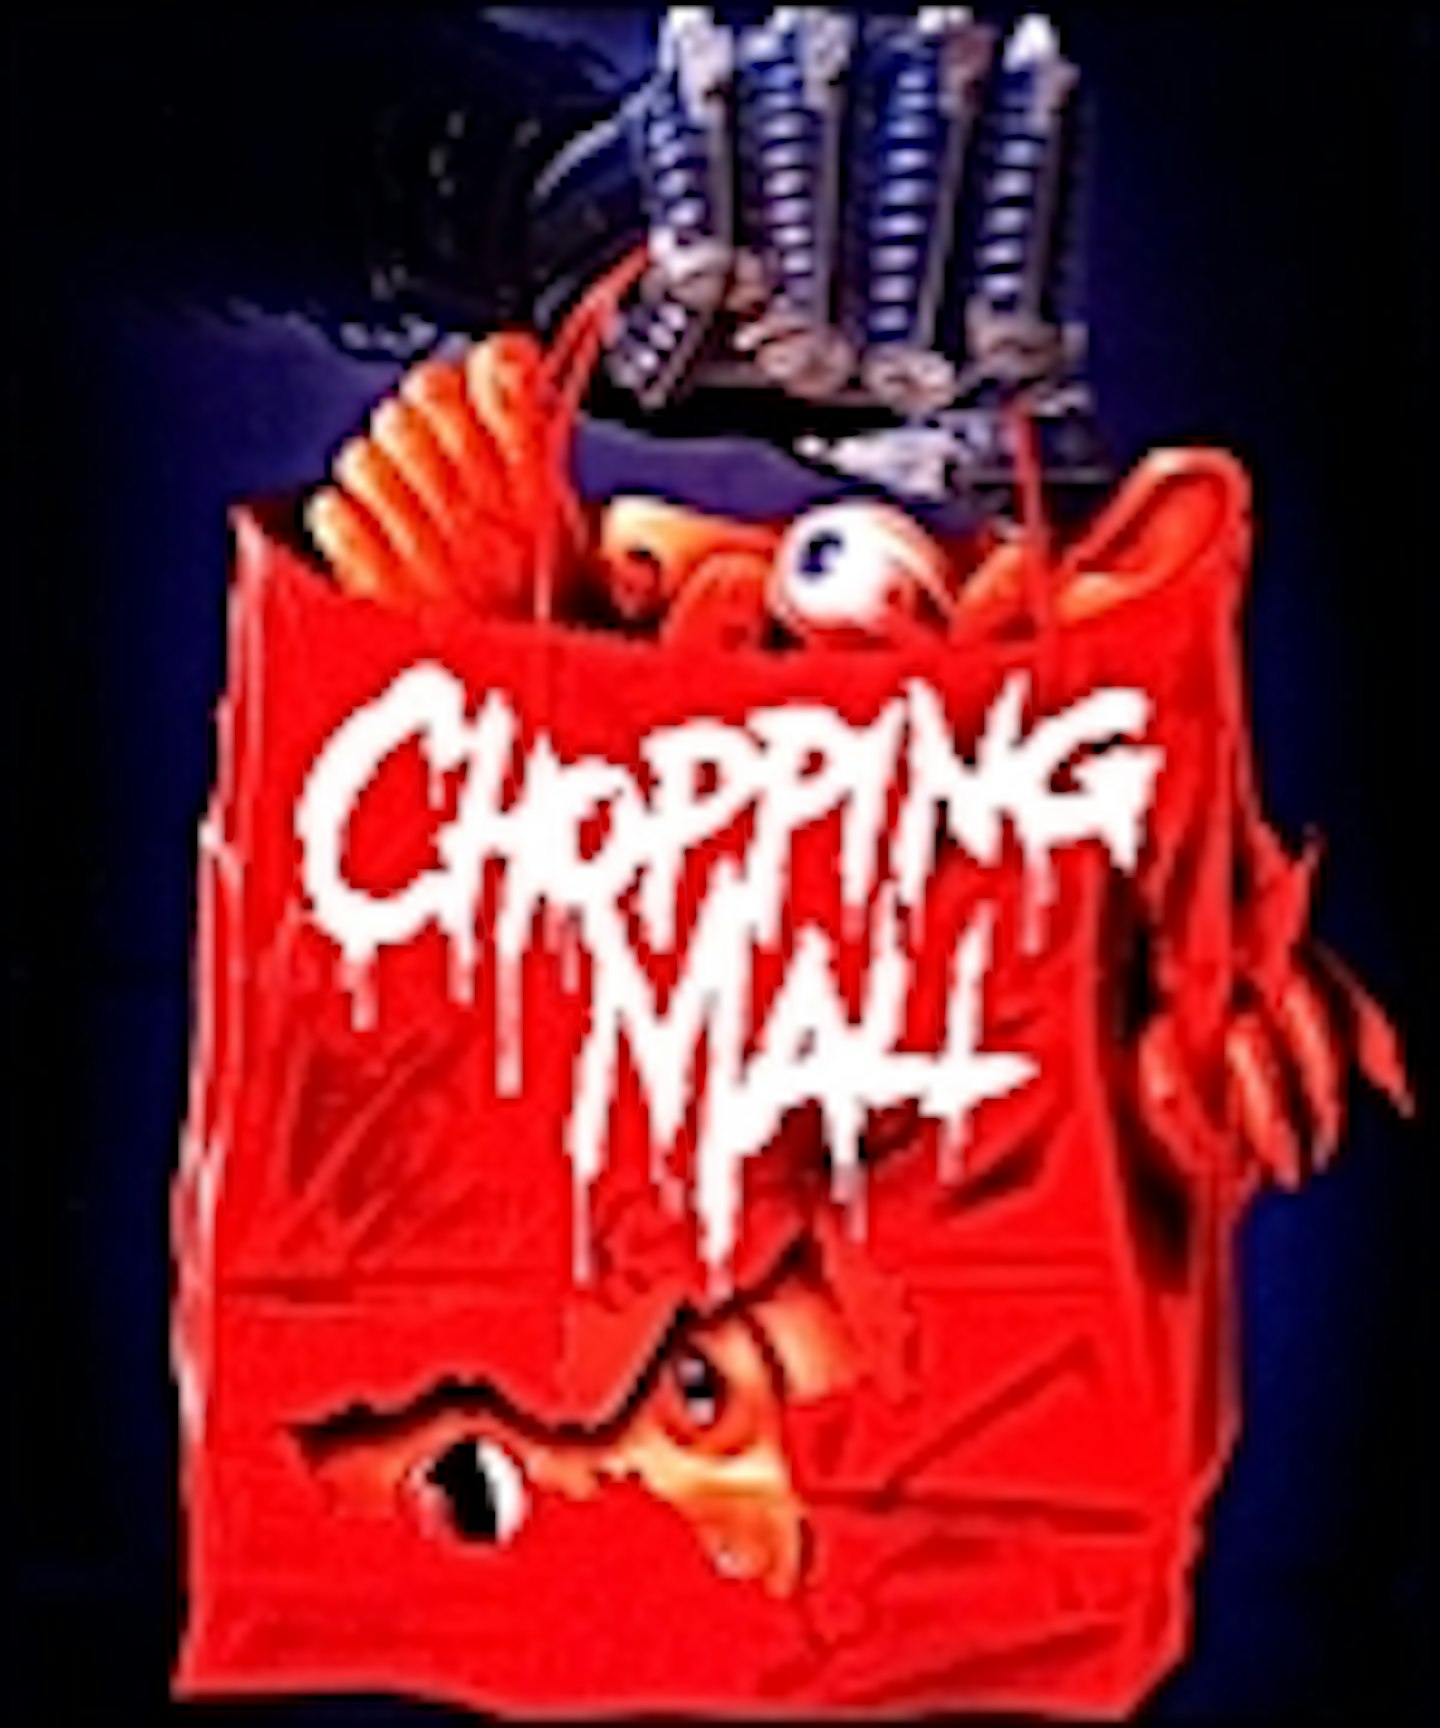 Chopping Mall Remake Planned